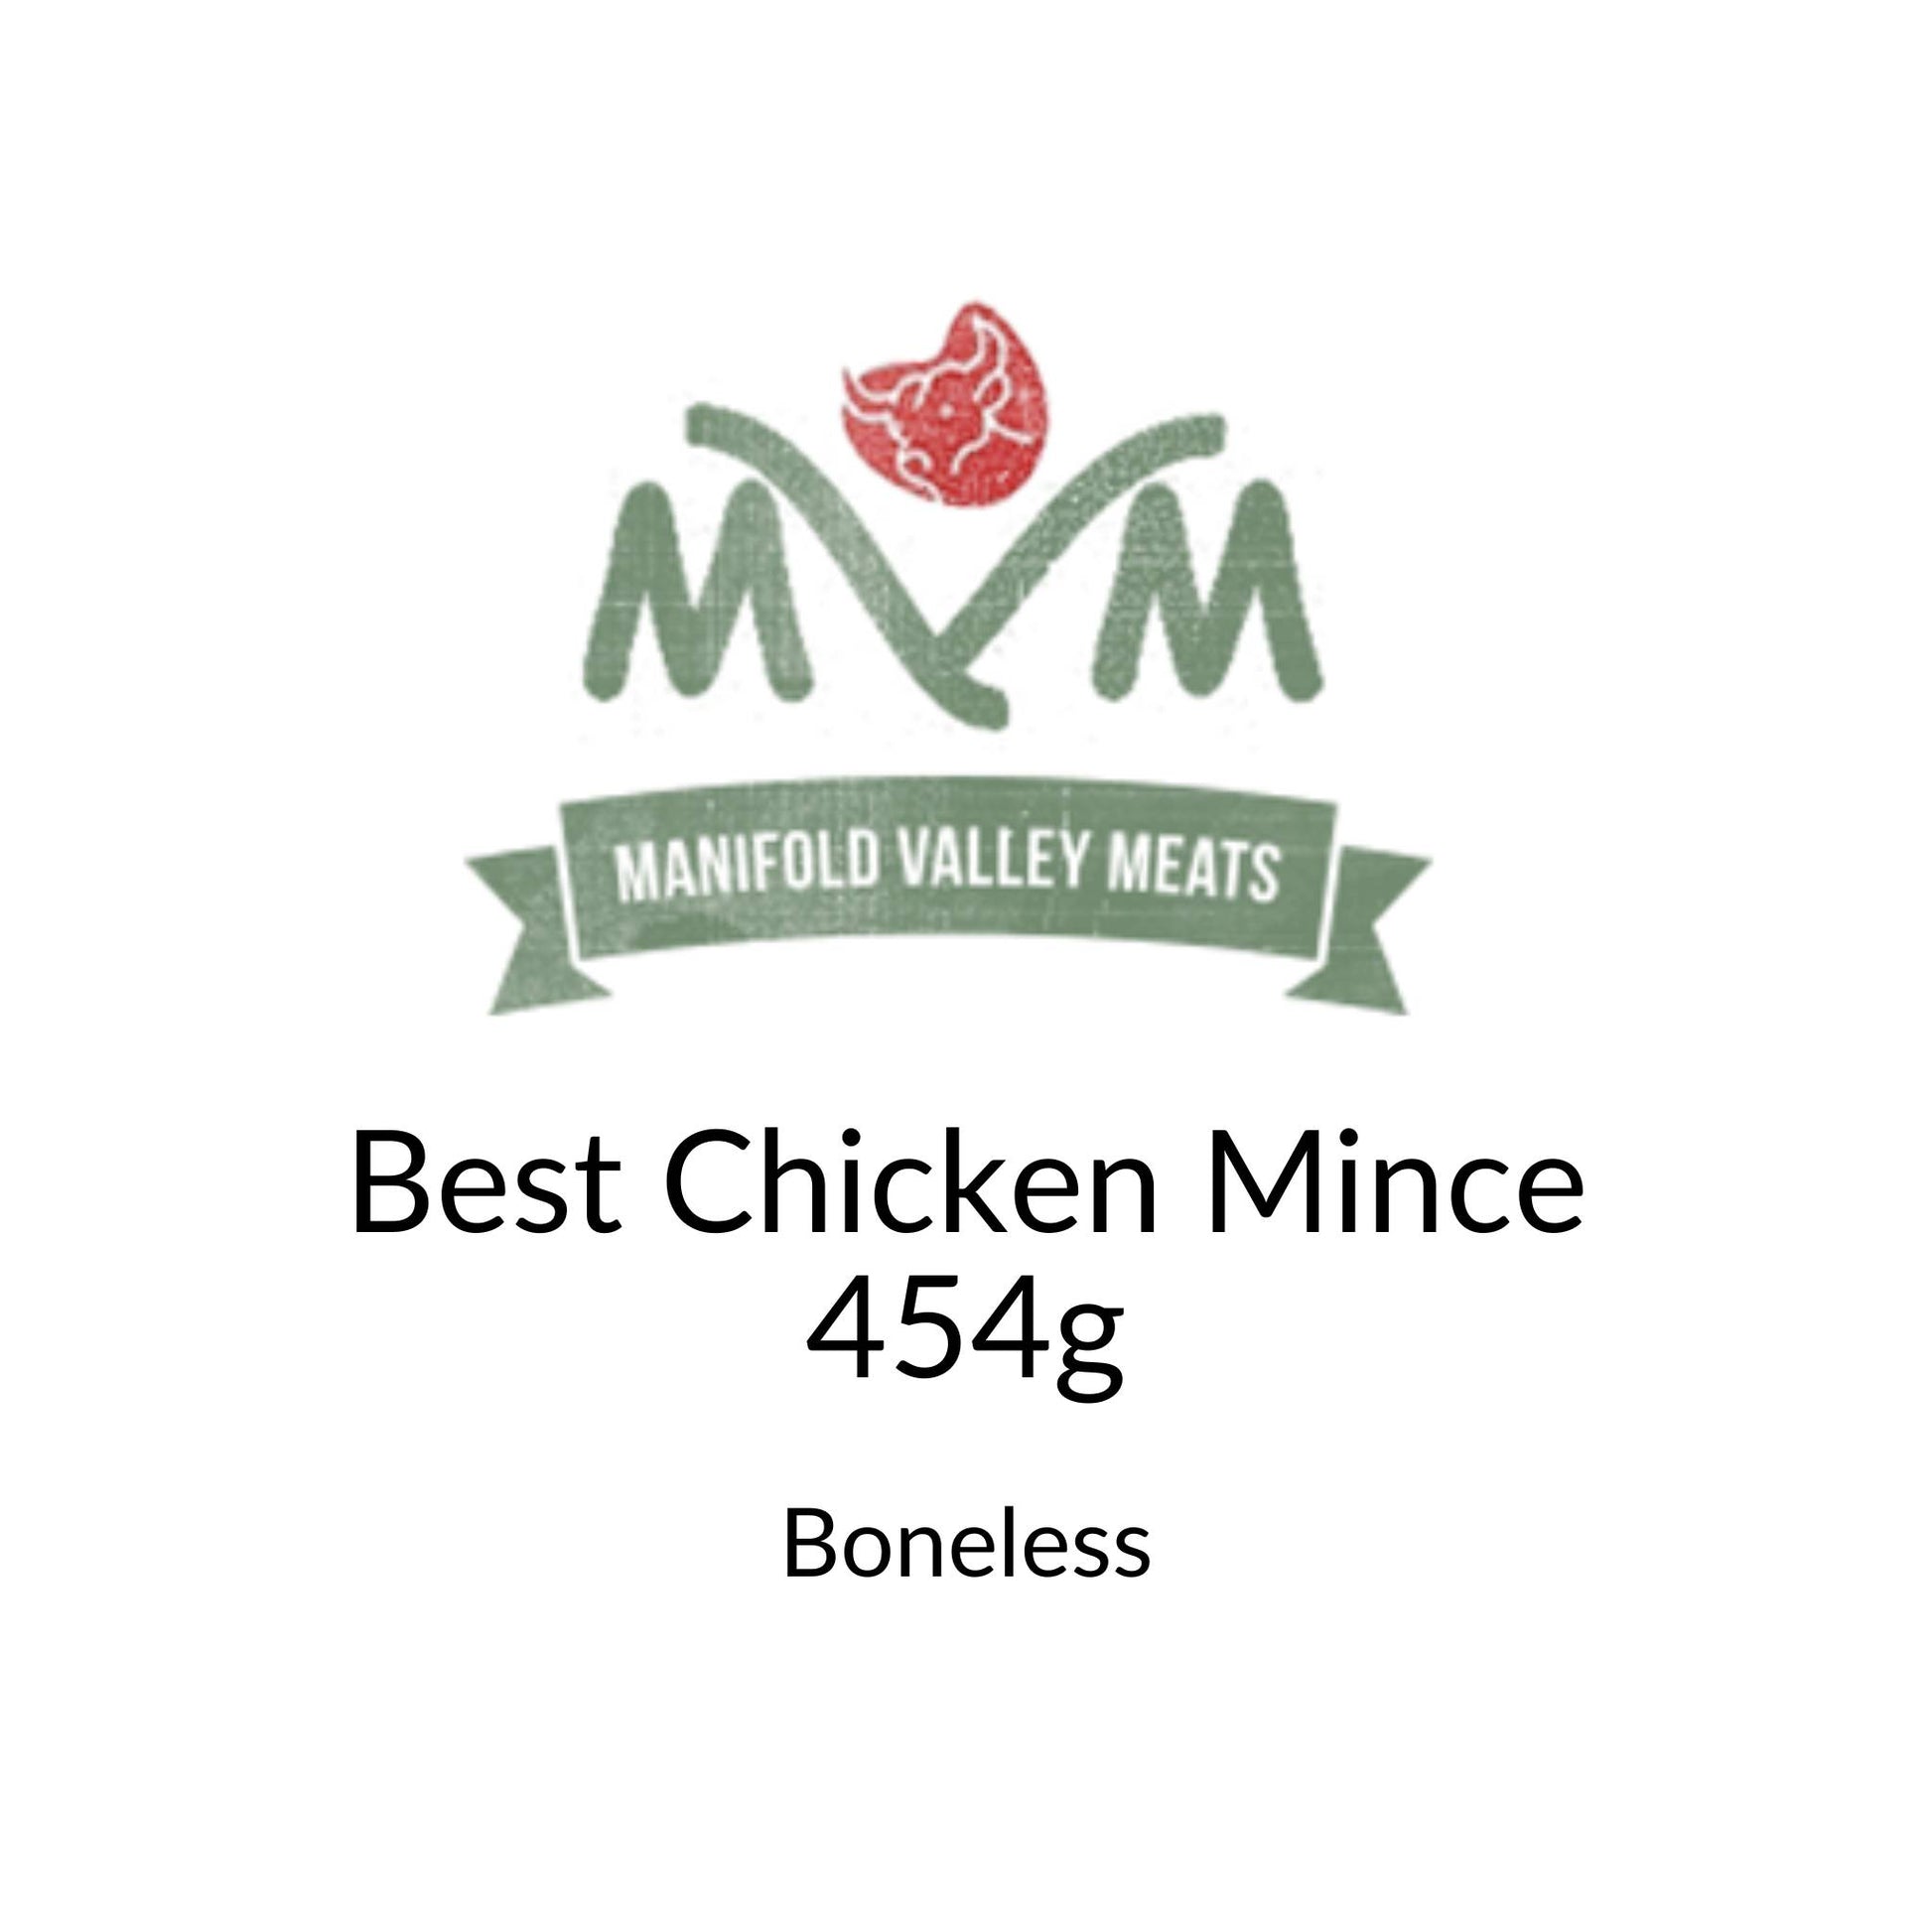 Manifold Valley Meats Best Chicken Mince Raw Dog Food